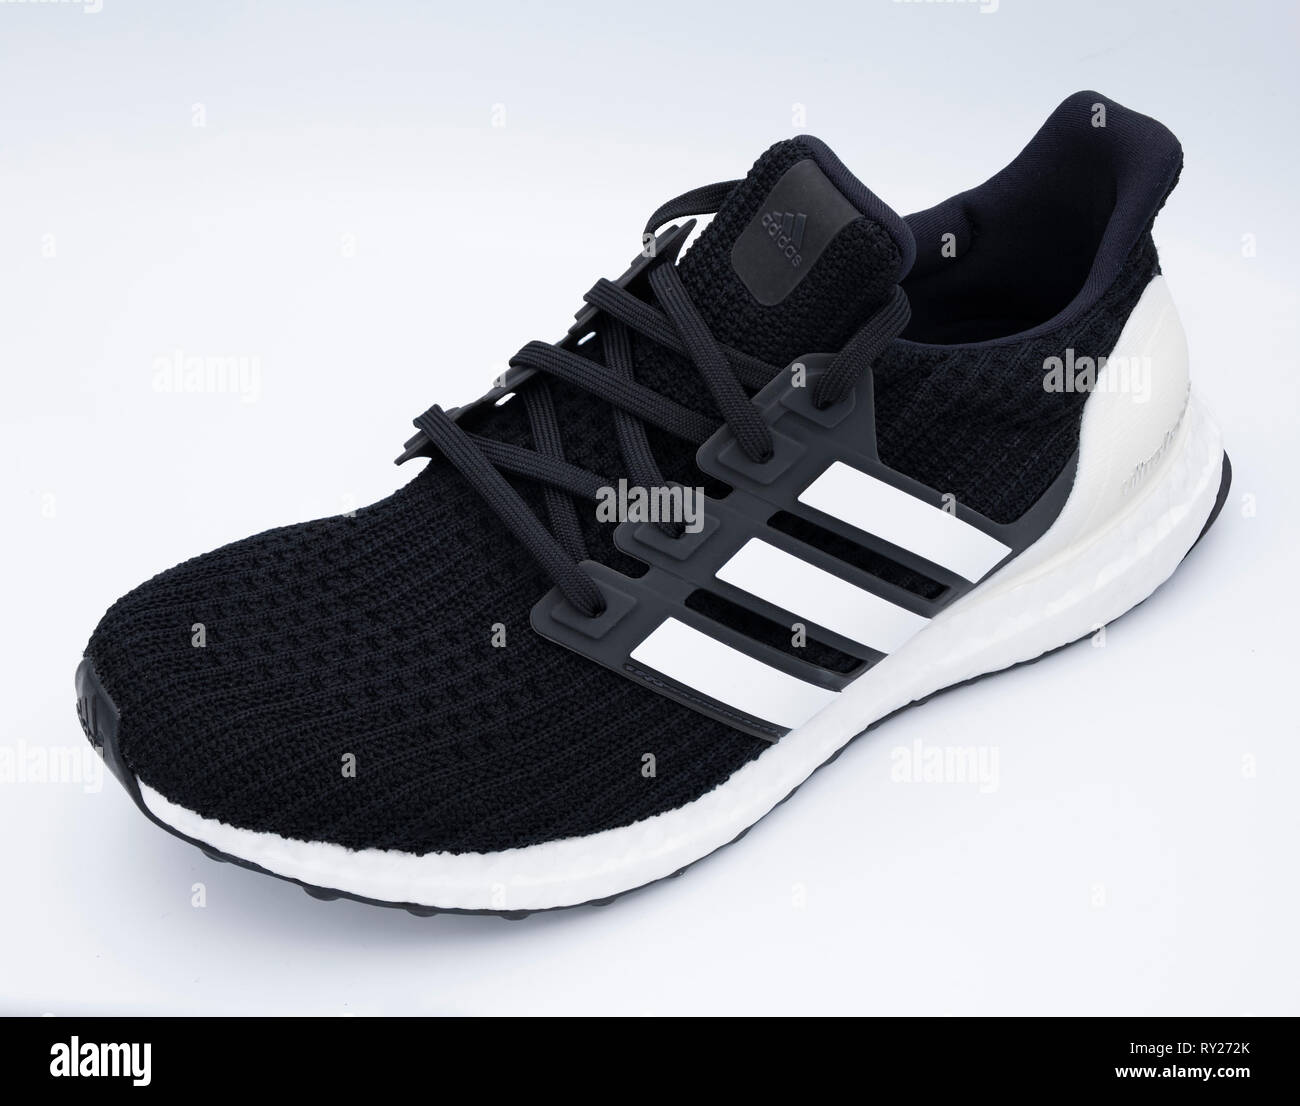 Adidas ultraboost High Resolution Stock Photography and Images - Alamy